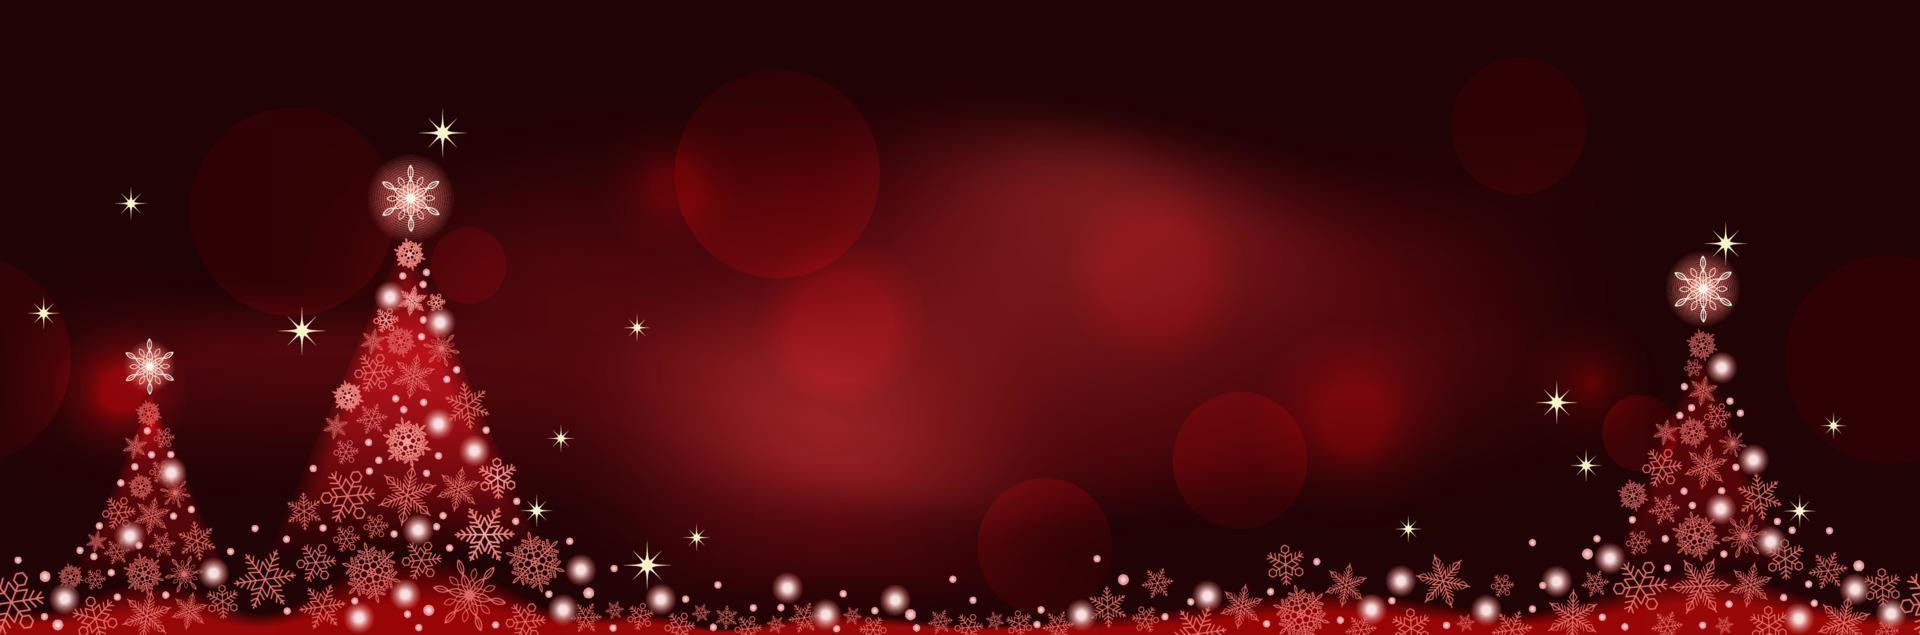 Abstract Red Winter Seamless Vector Background With Christmas Trees And Text Space. Horizontally Repeatable.